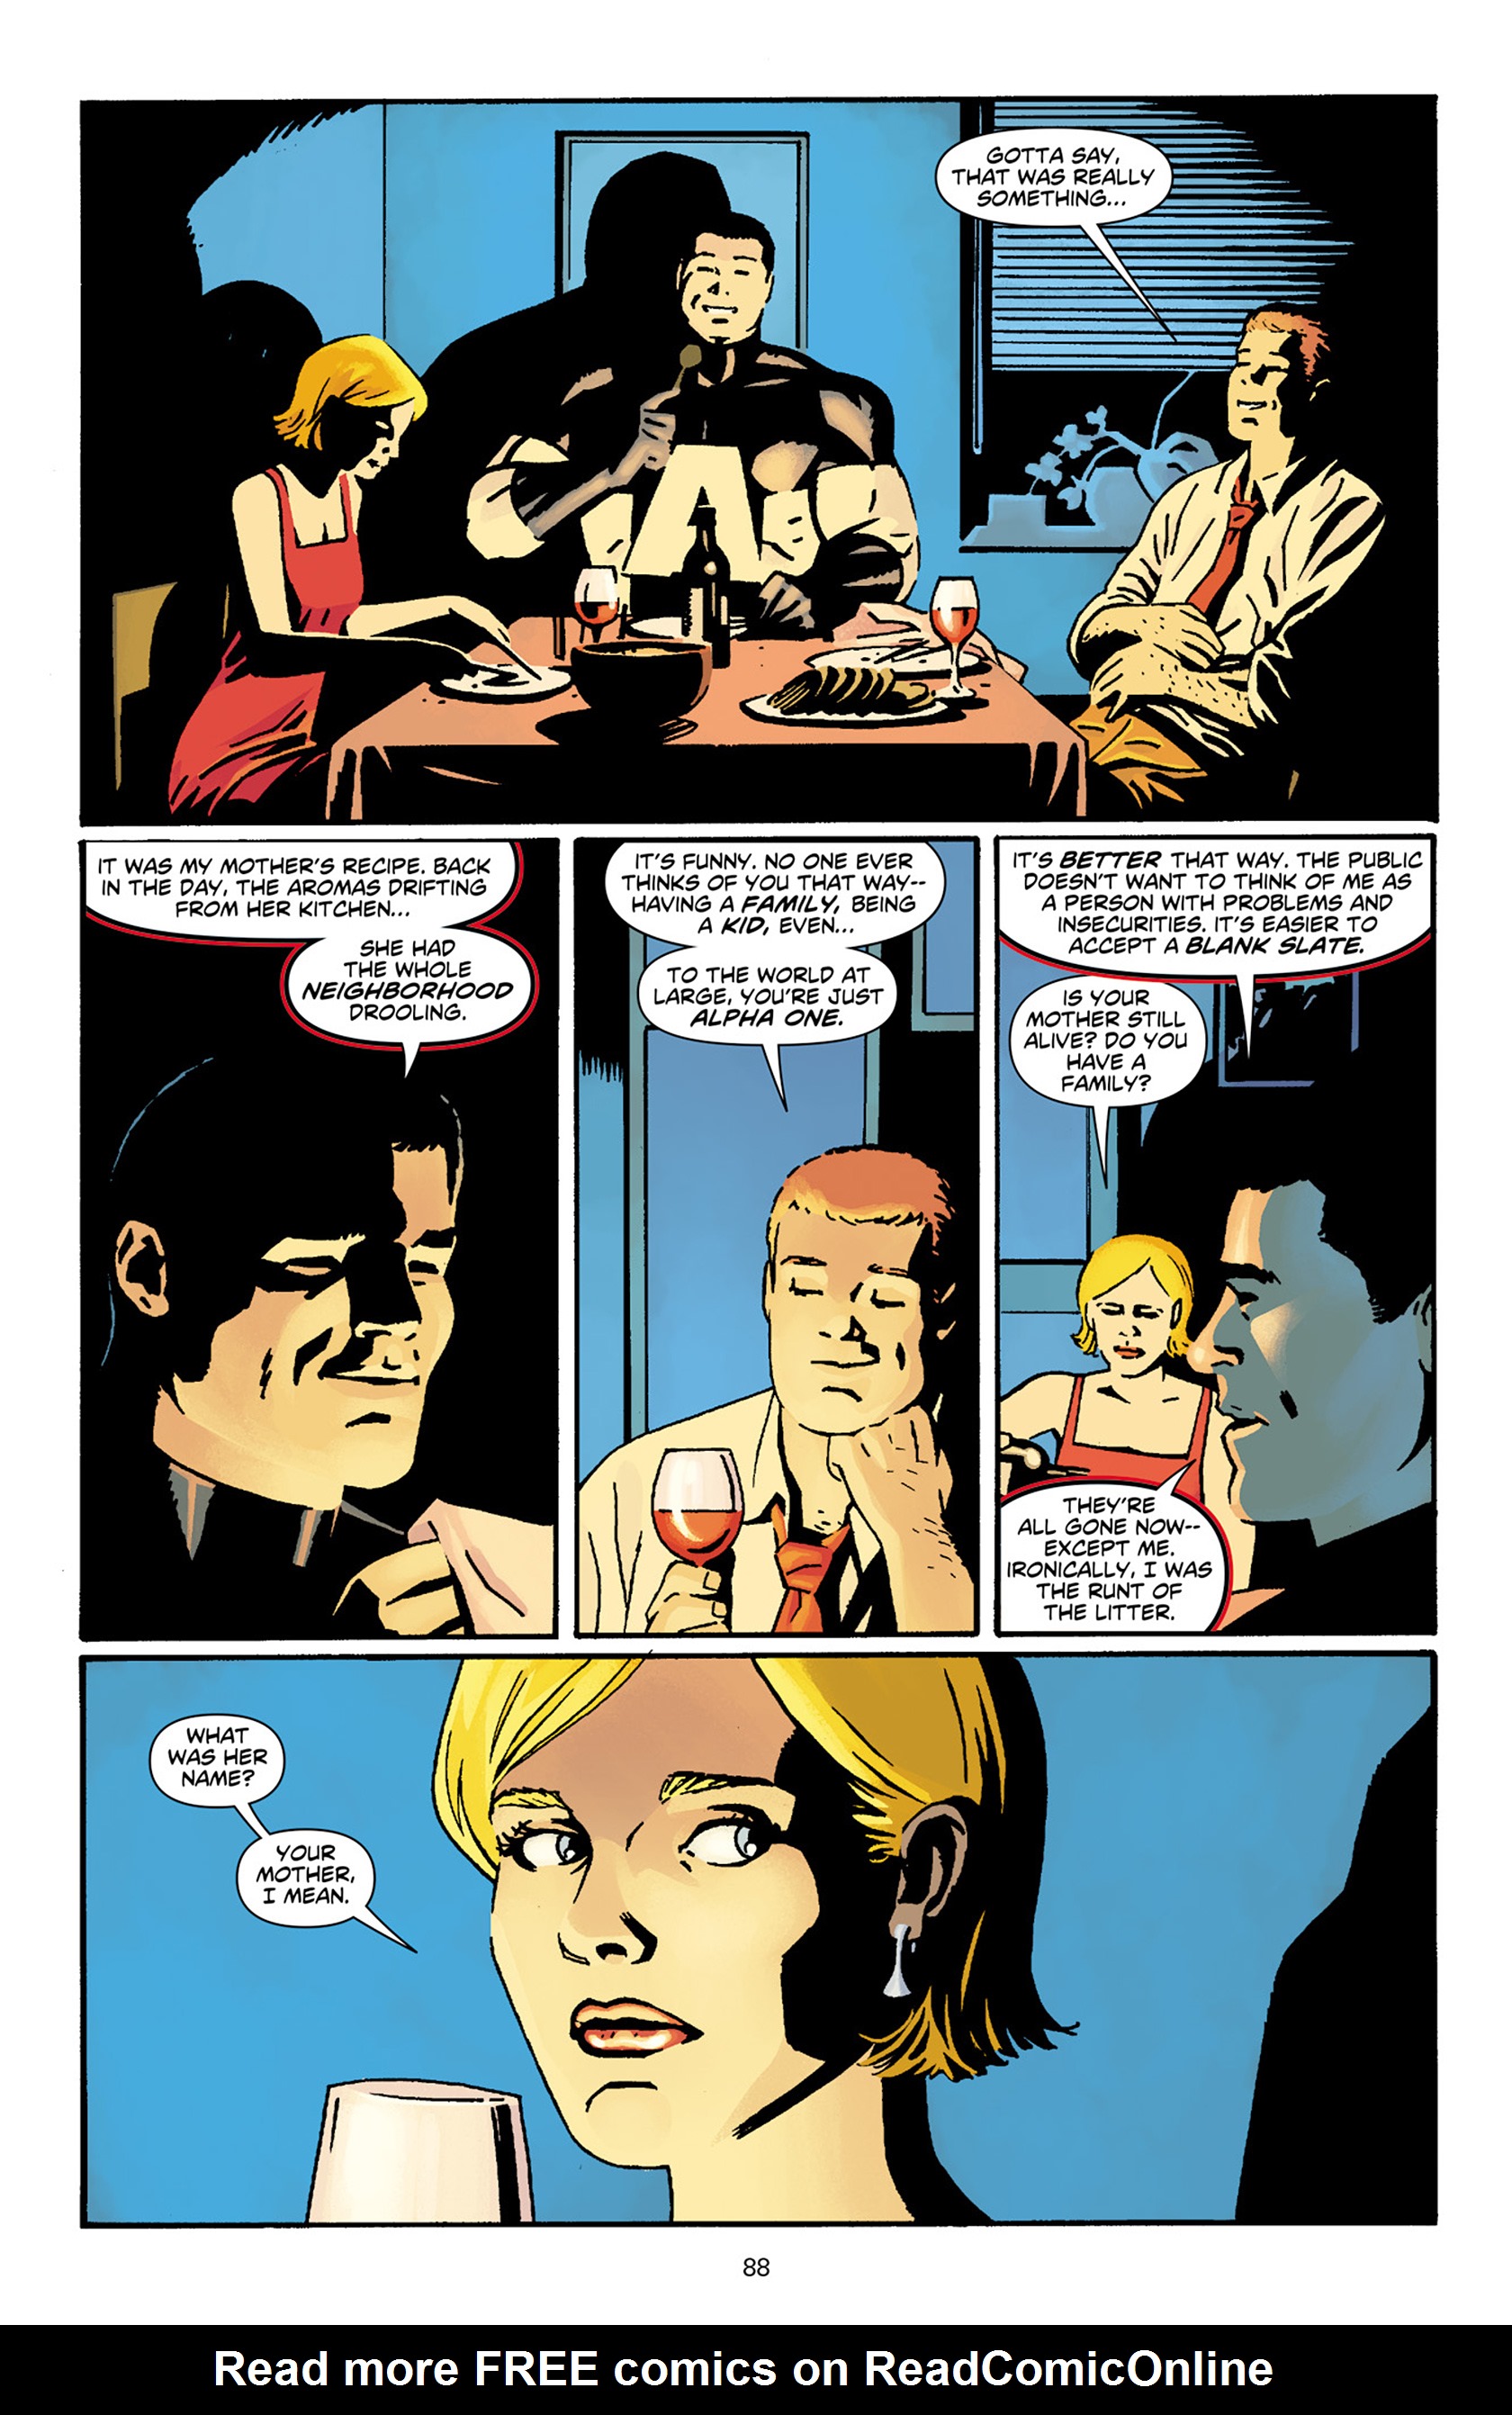 Read online The Mighty comic -  Issue # TPB - 84